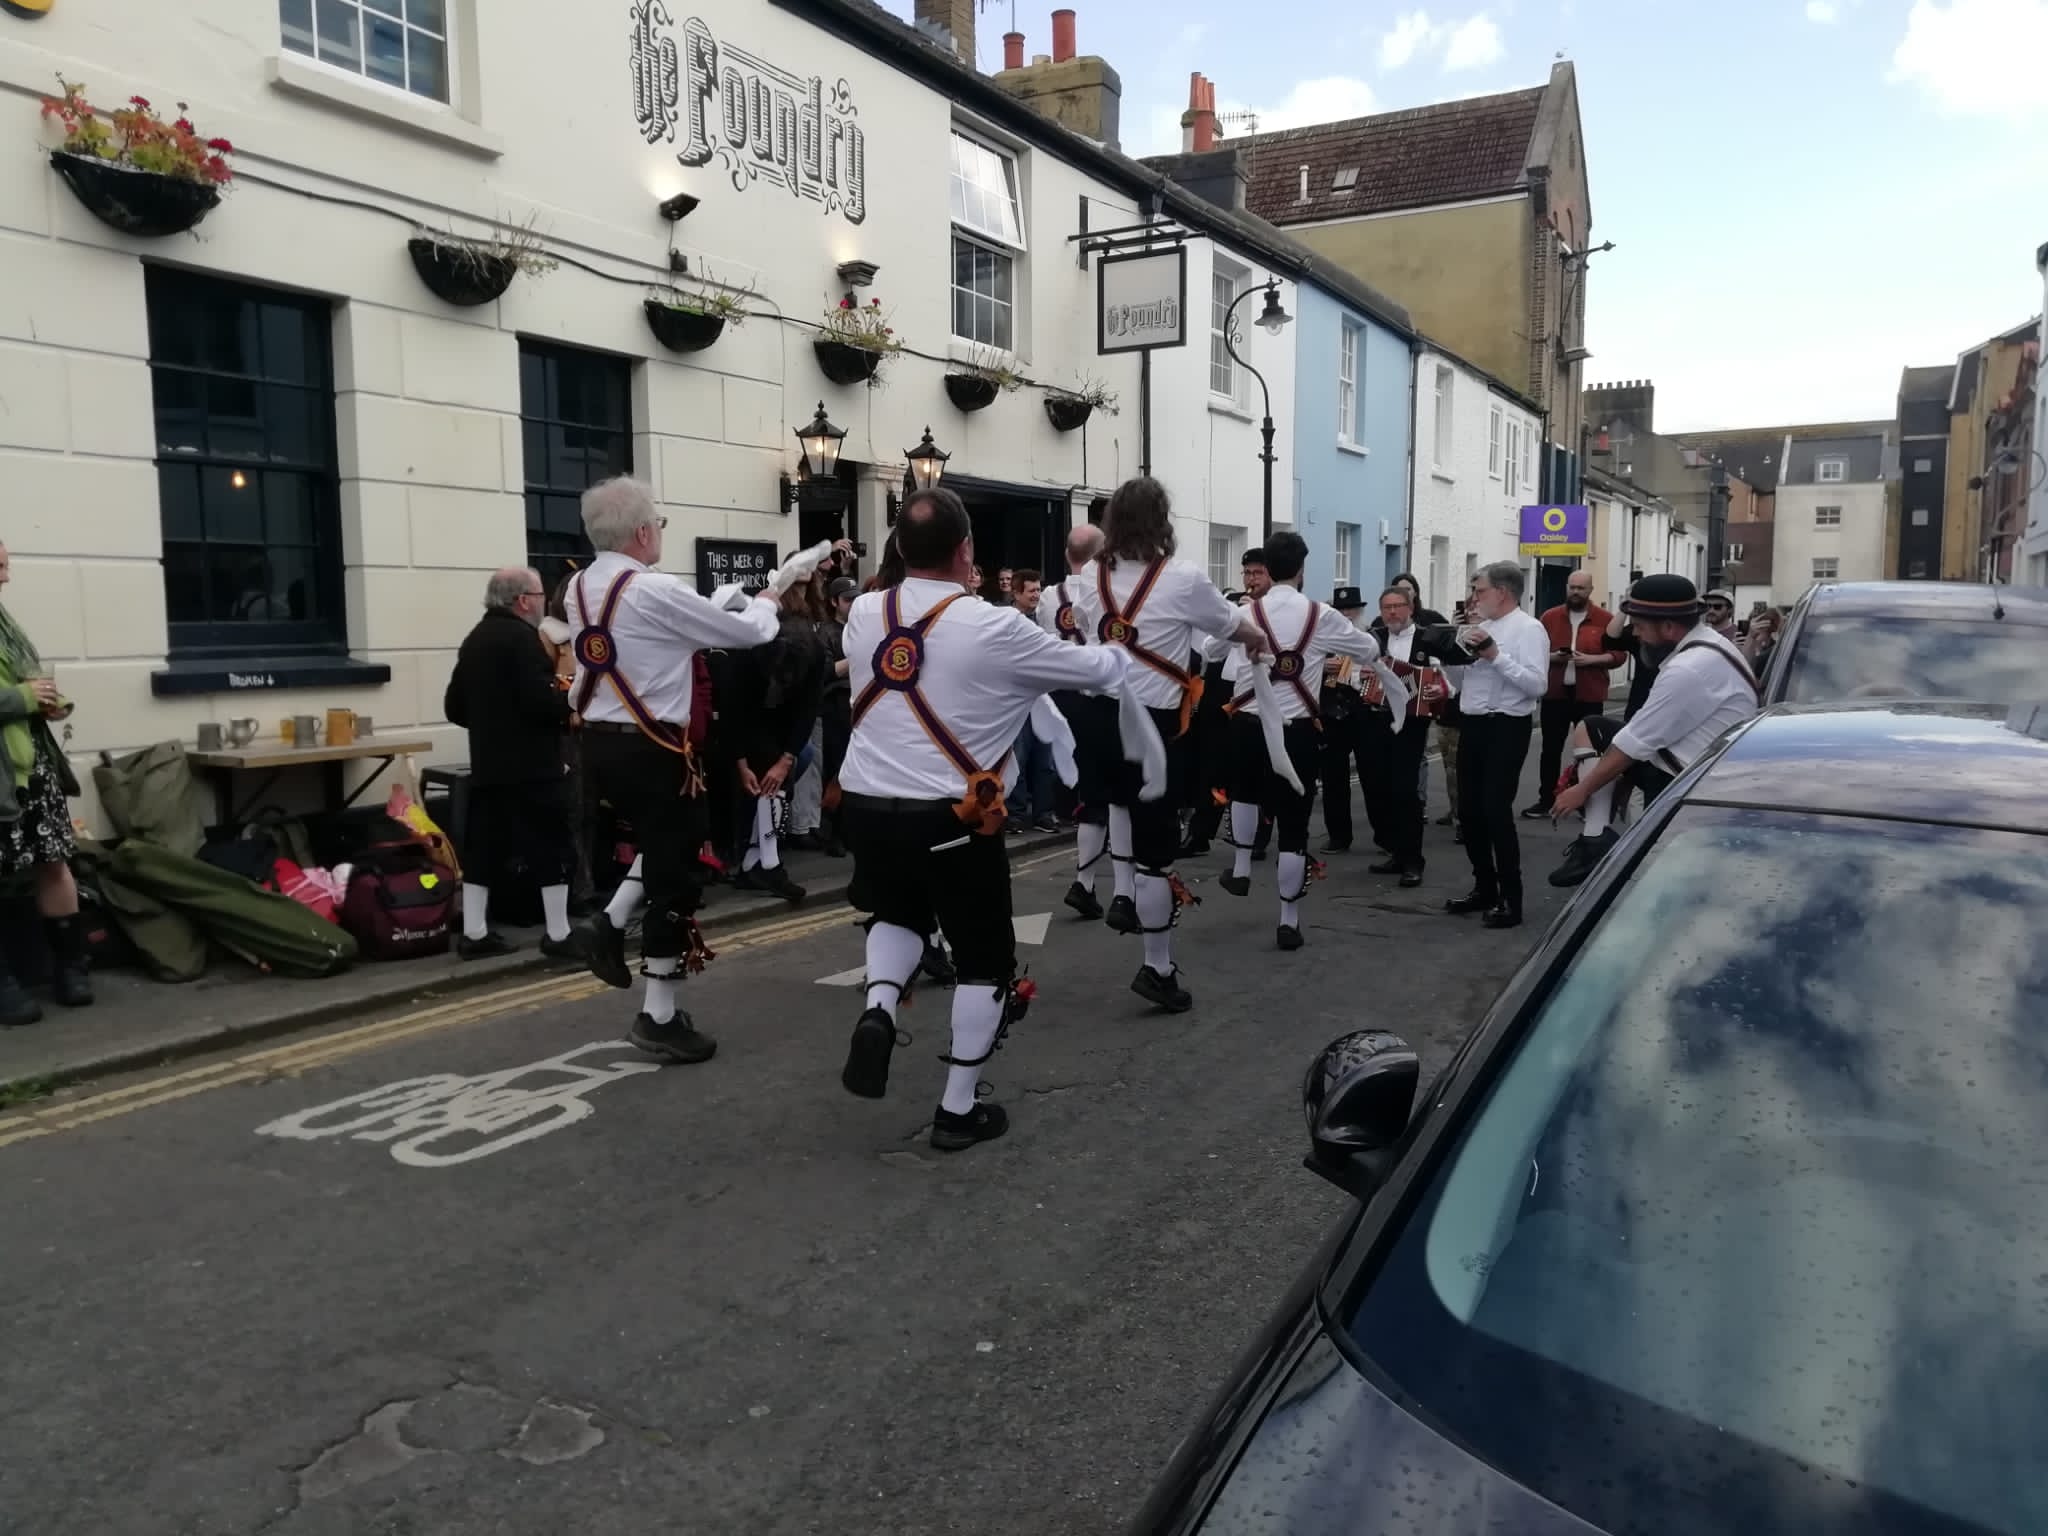 Brighton Morris dance a hanky dance outside The Foundry pub during our North Laine Tour on 11th May.